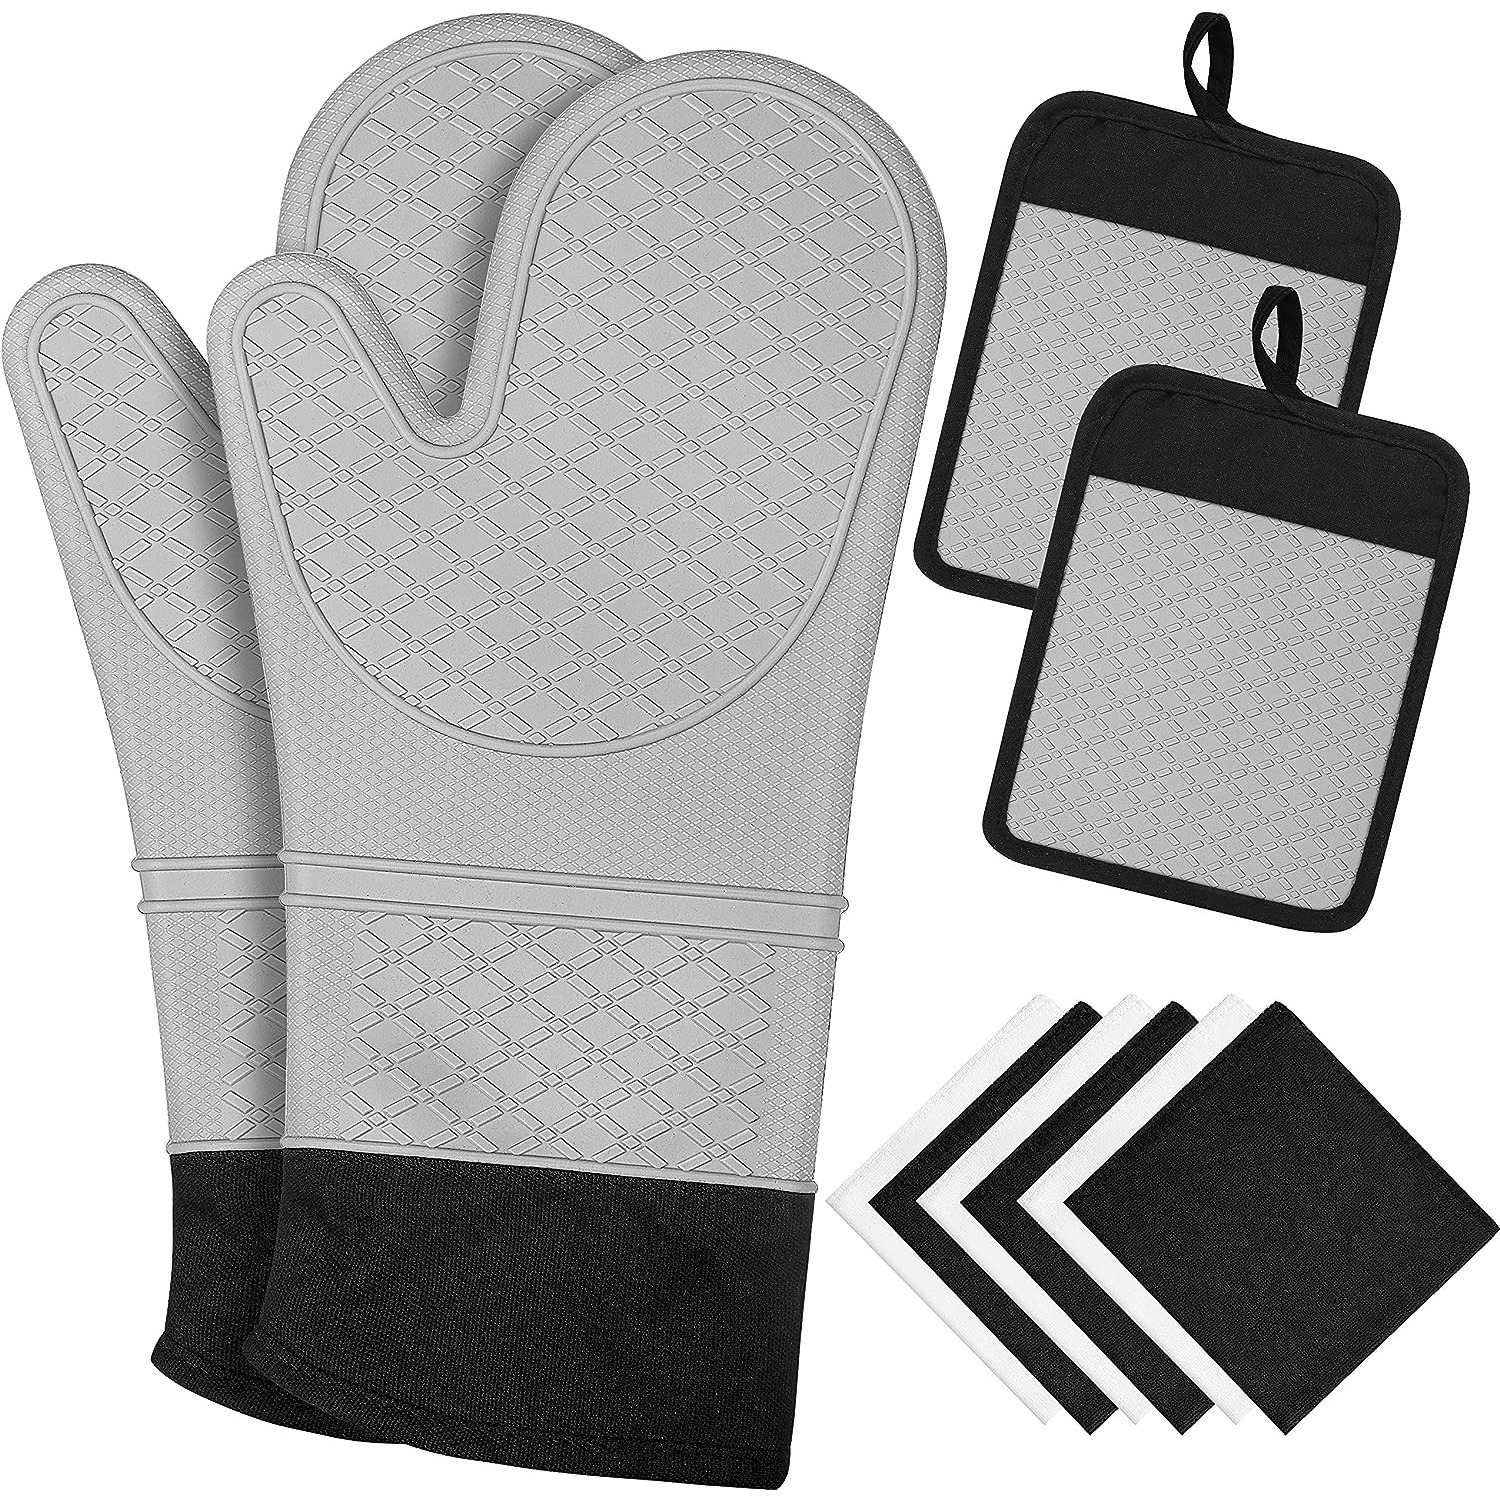 1pcs Microwave Baking BBQ Glove Cotton Cute Oven Mitts Heat Resistant  Potholders Non-slip Kitchen Cooking